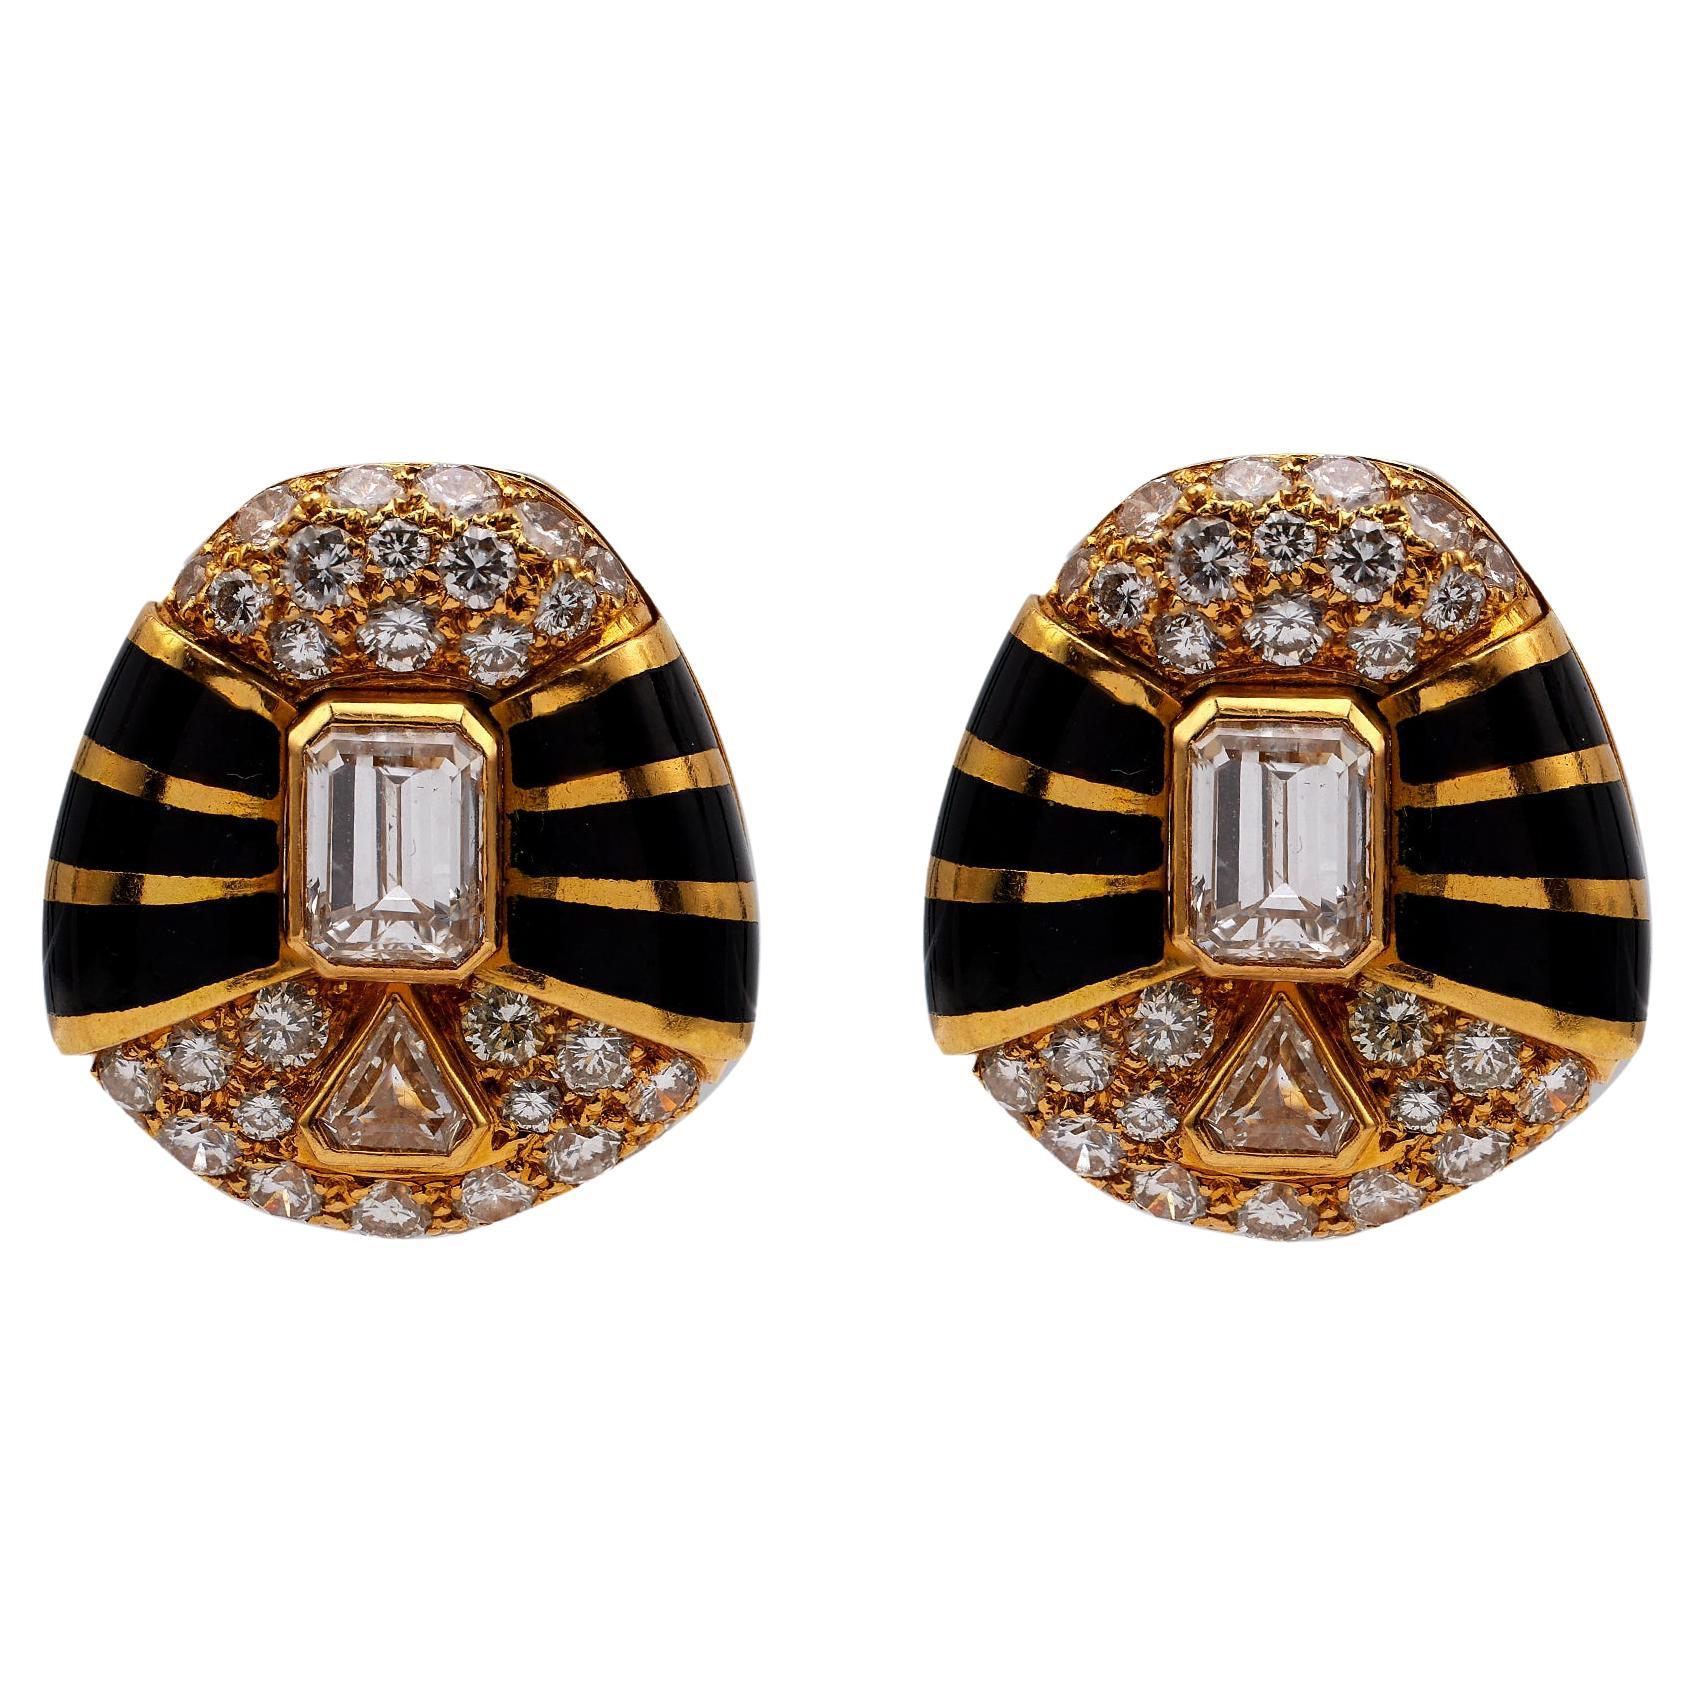 Vintage French Diamond and Enamel 18k Yellow Gold Clip on Earrings